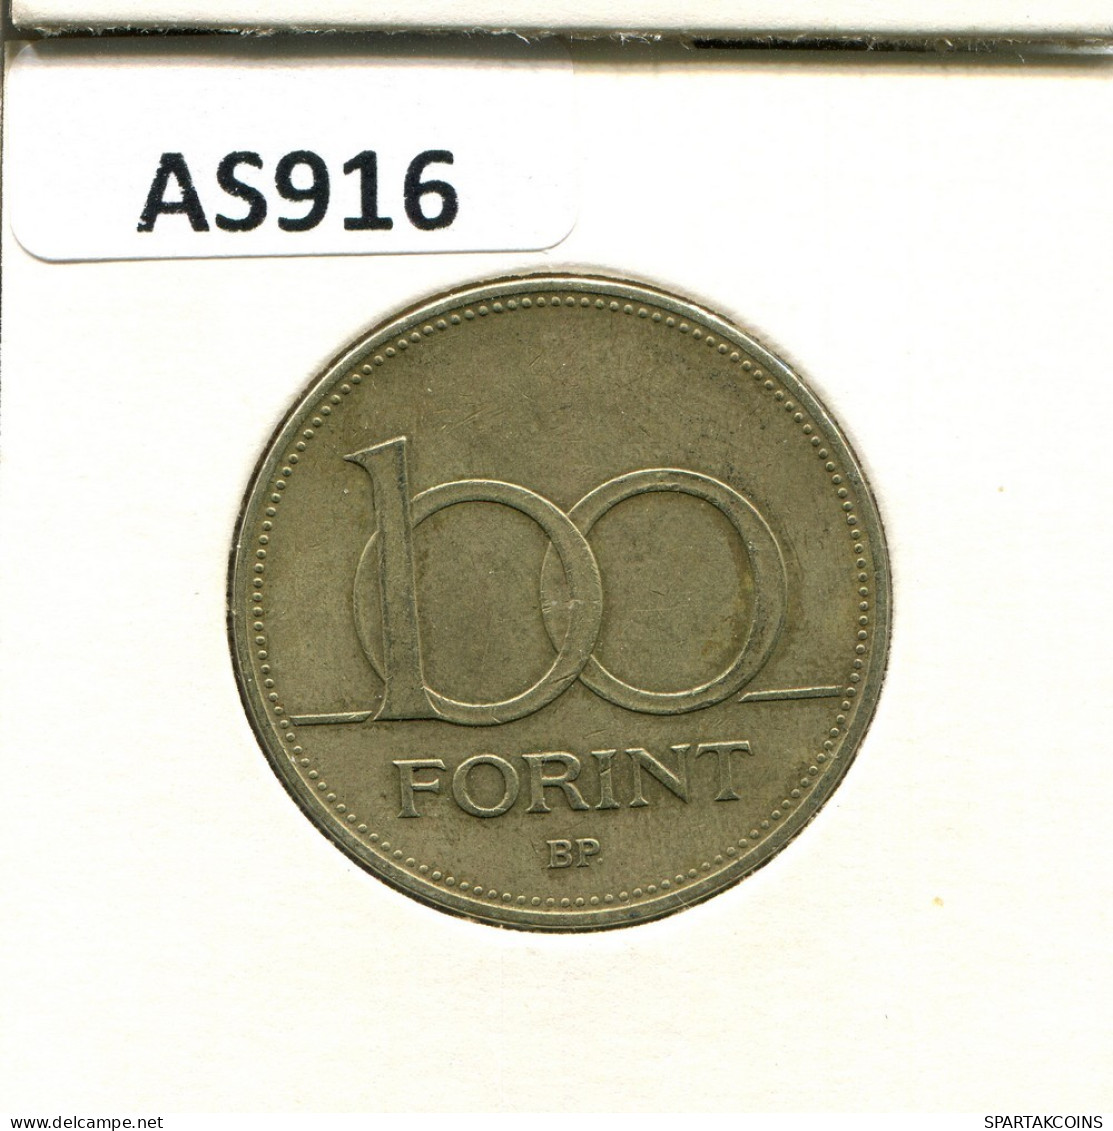 100 FORINT 1996 HUNGARY Coin #AS916.U.A - Ungarn